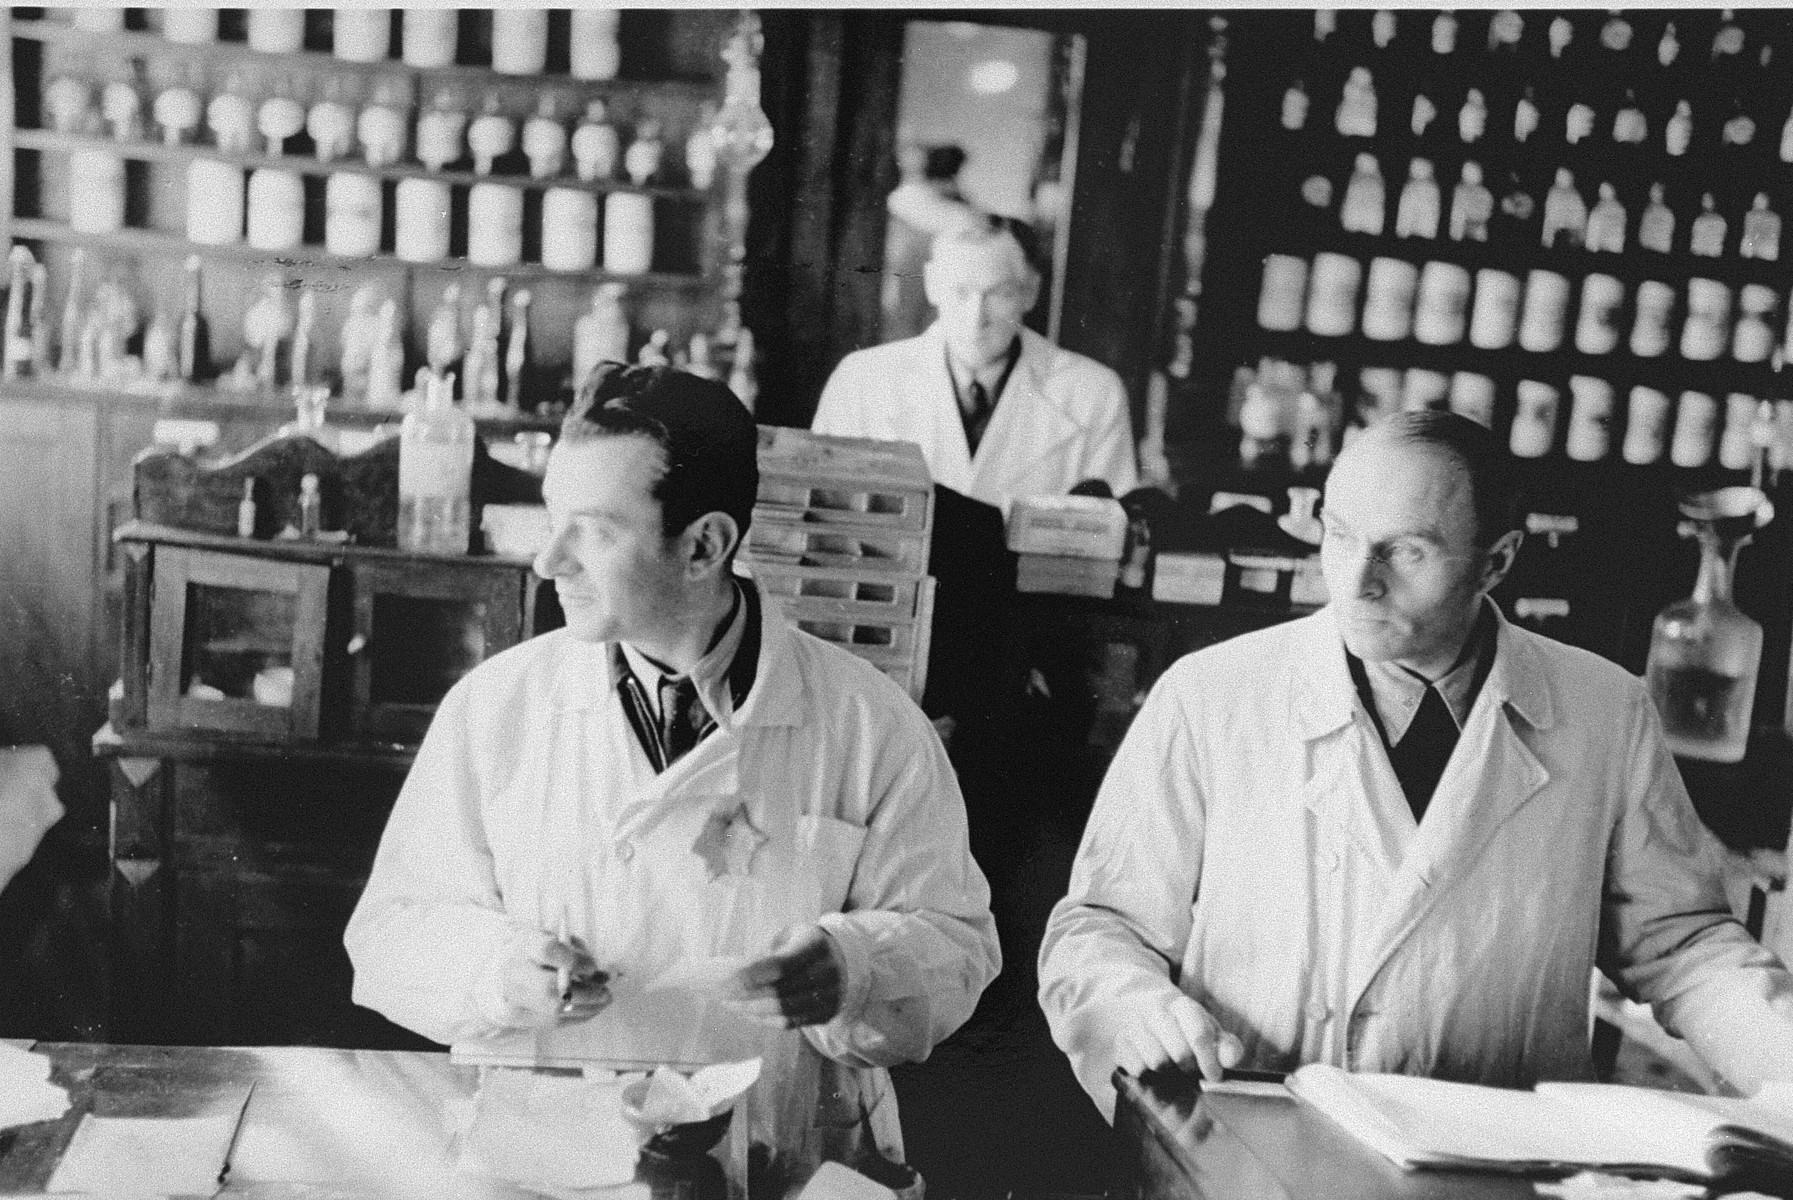 Jewish pharmacists at work in the only pharmacy in the Kovno ghetto. 

Among those pictured are head pharmacist Aizik Srebnitzki (left), and N. Segalsohn (from Memel).

Aizik Srebnitzki, who was active in the ghetto's Zionist underground, kept a clandestine radio in the basement of the pharmacy for use by the underground.